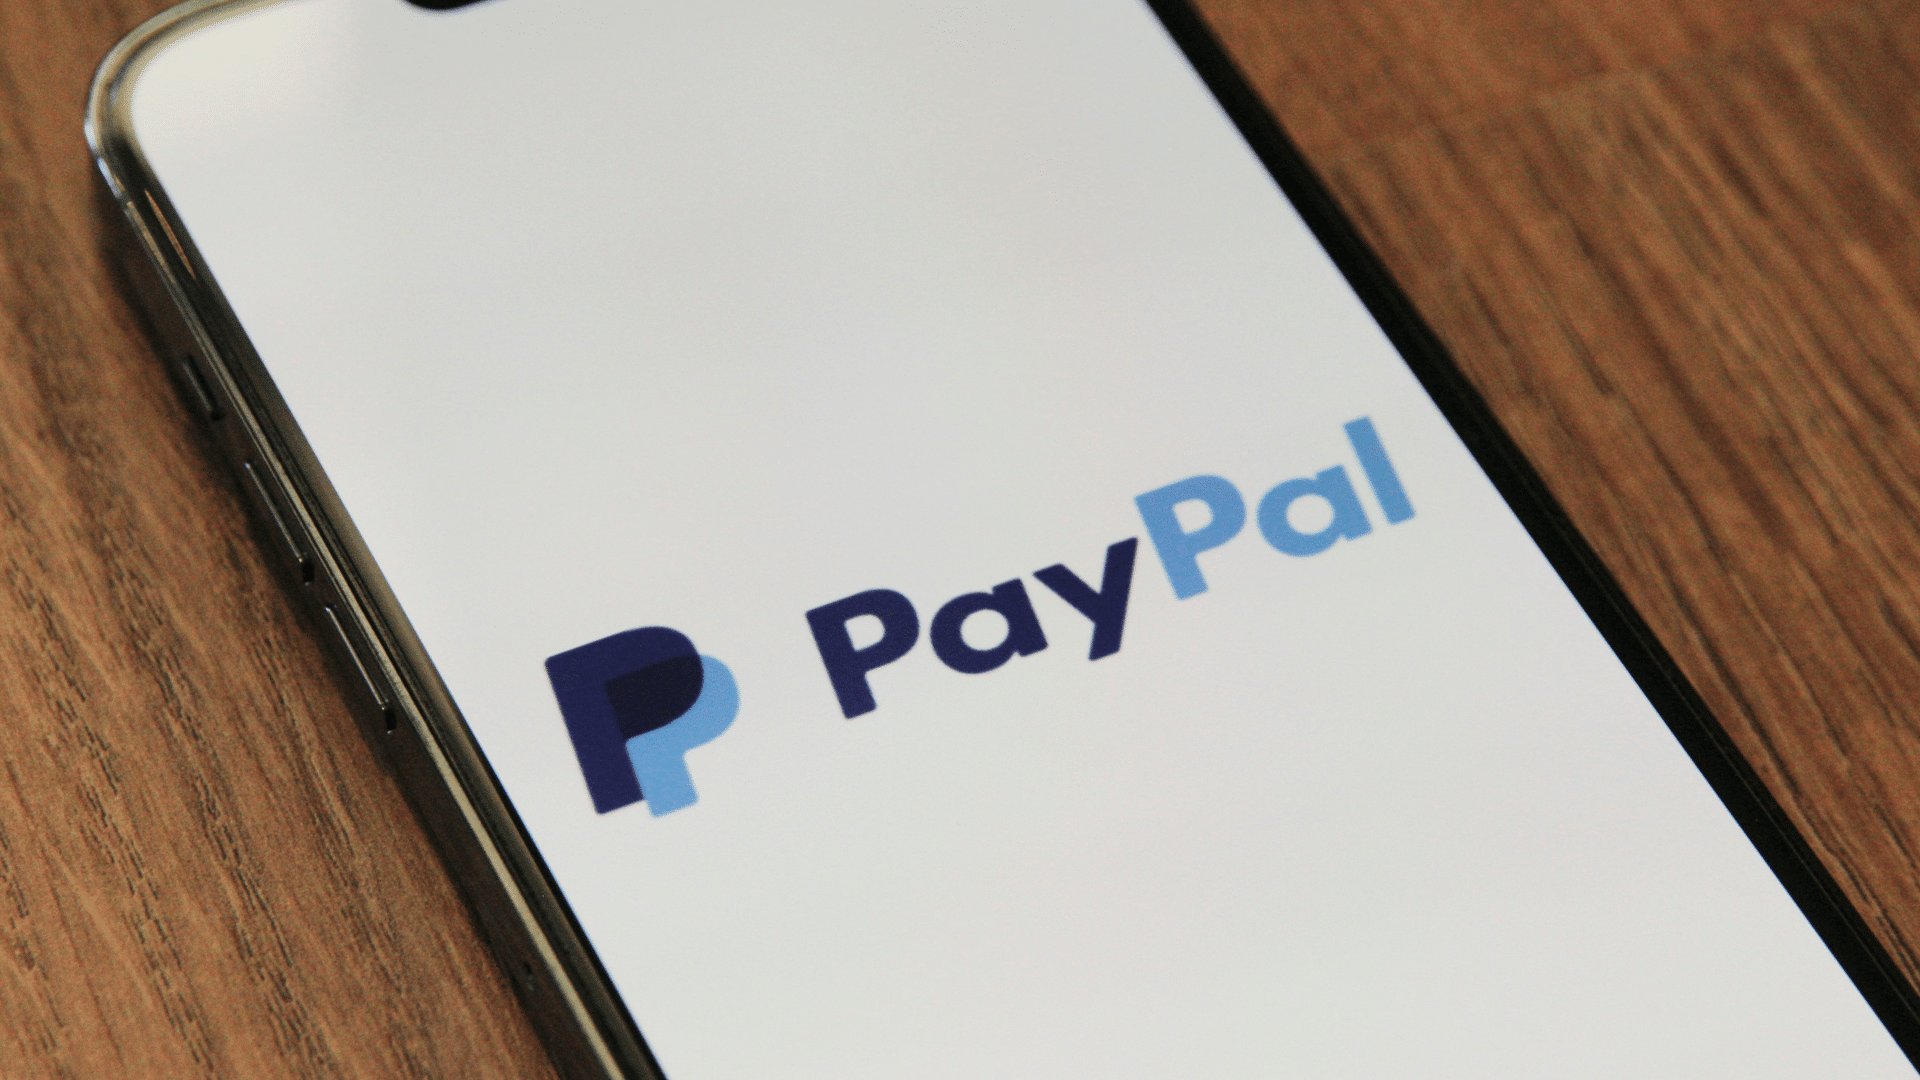 PayPal Launches 'Tap-to-Pay' on iPhone for SMBs